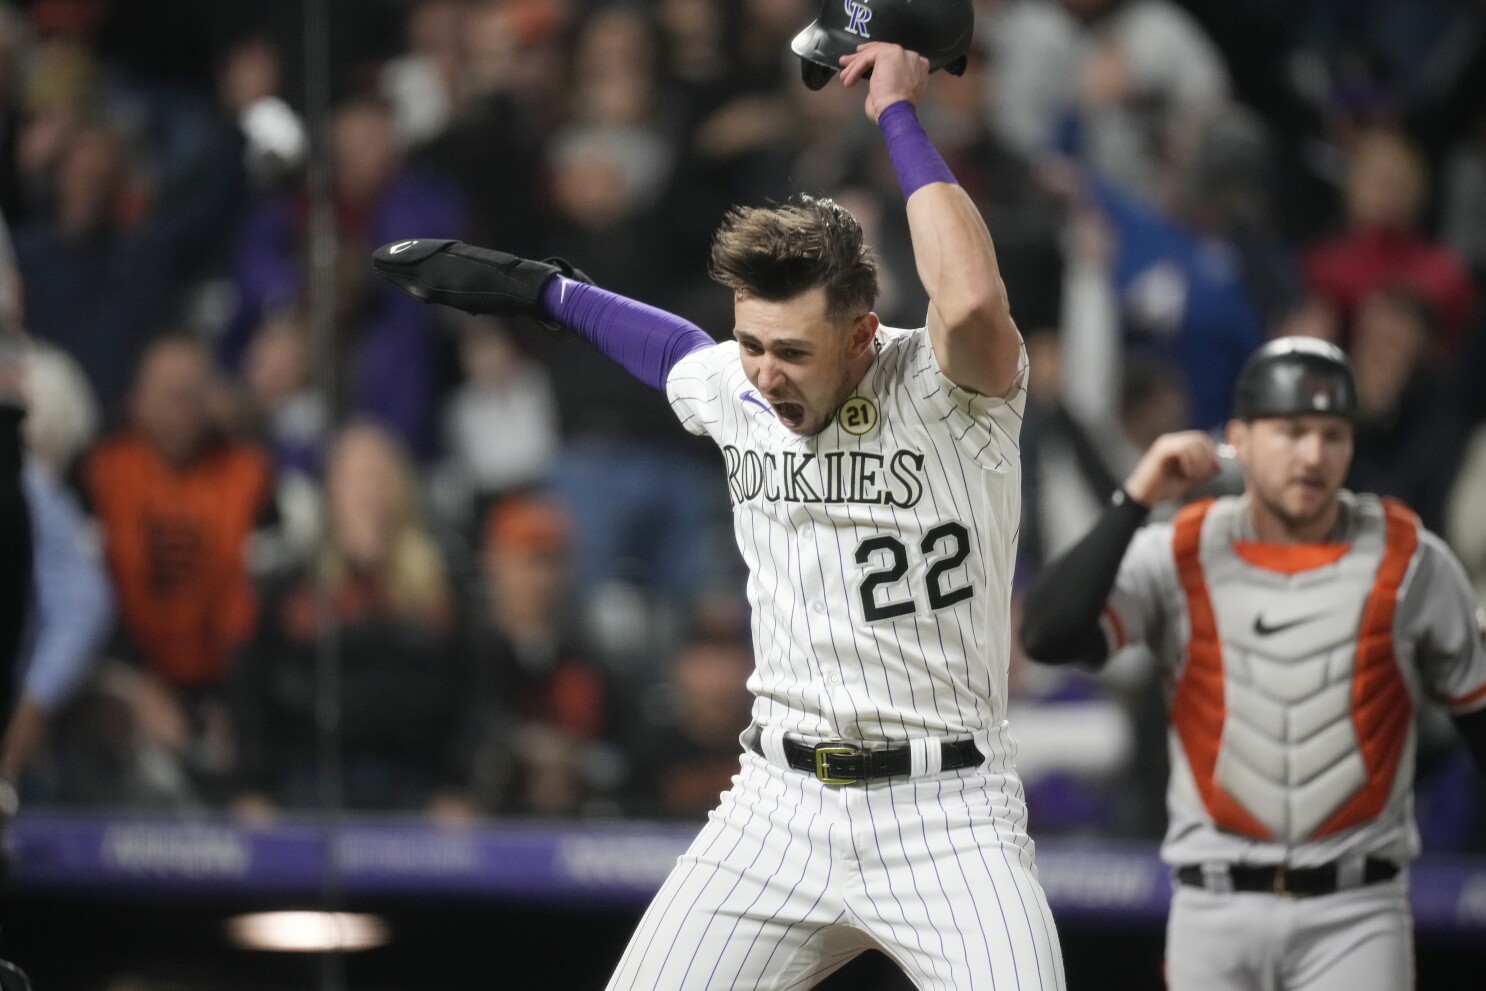 Colorado Rockies fall to Nationals behind another rough Márquez